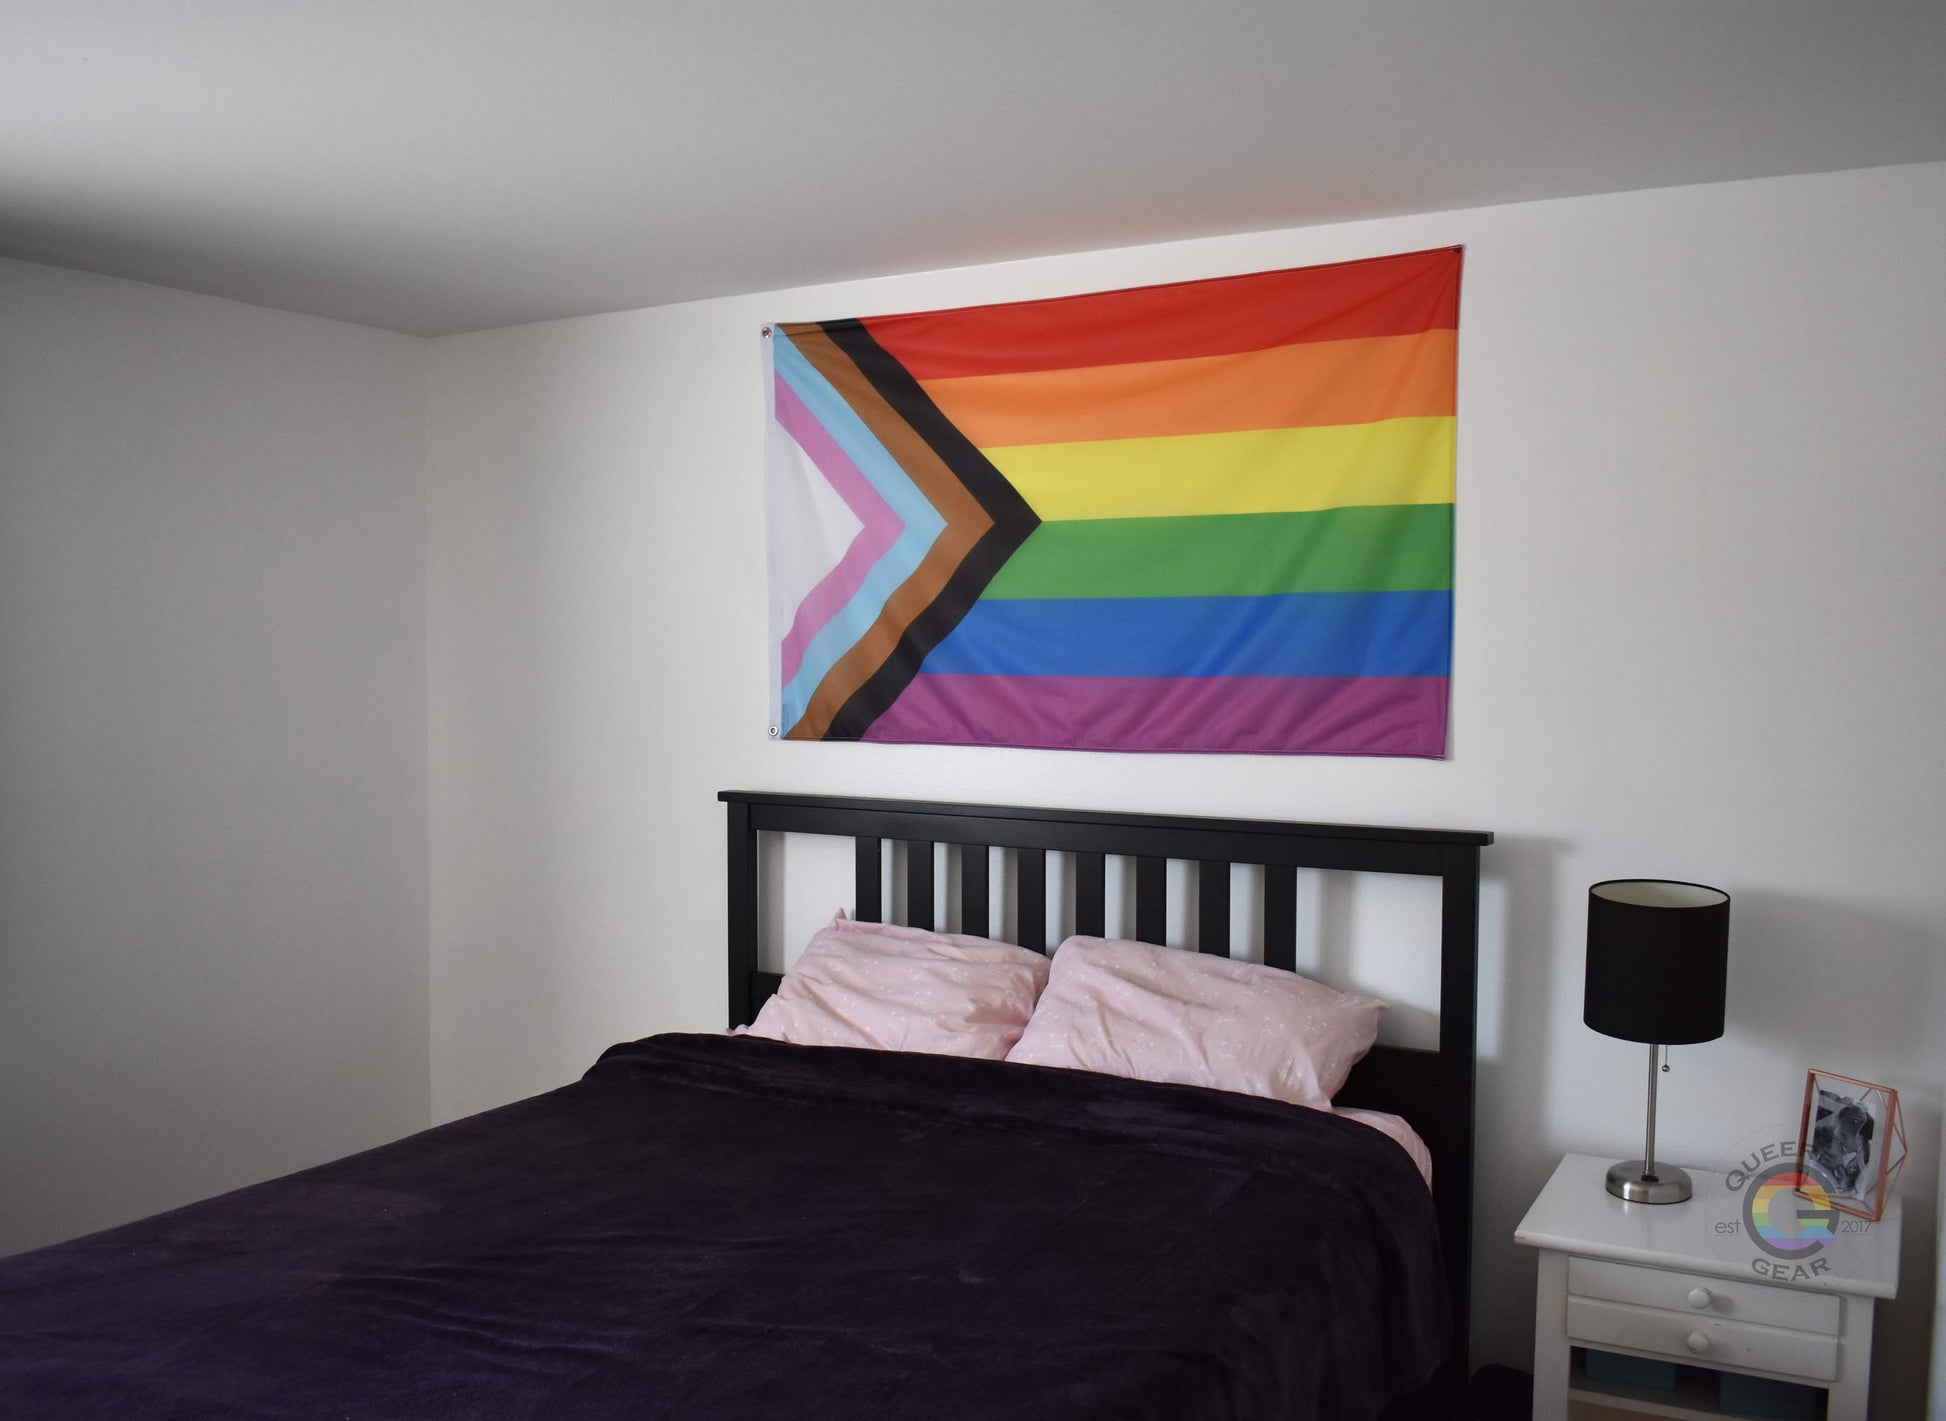 3’x5’ progress pride flag hanging horizontally on the wall of a bedroom centered above a bed with a purple blanket